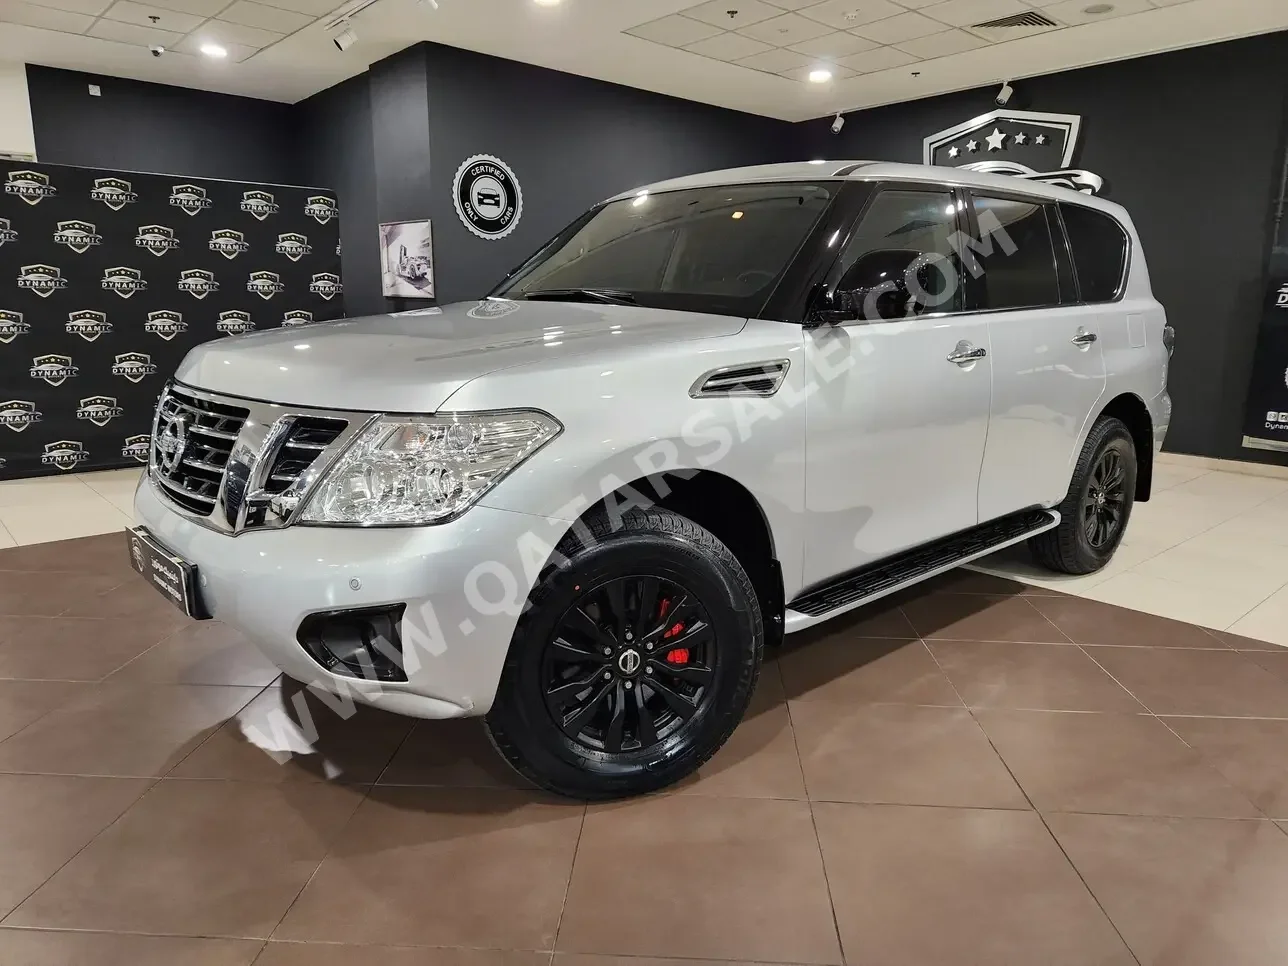 Nissan  Patrol  XE  2019  Automatic  35,000 Km  6 Cylinder  Four Wheel Drive (4WD)  SUV  Silver  With Warranty